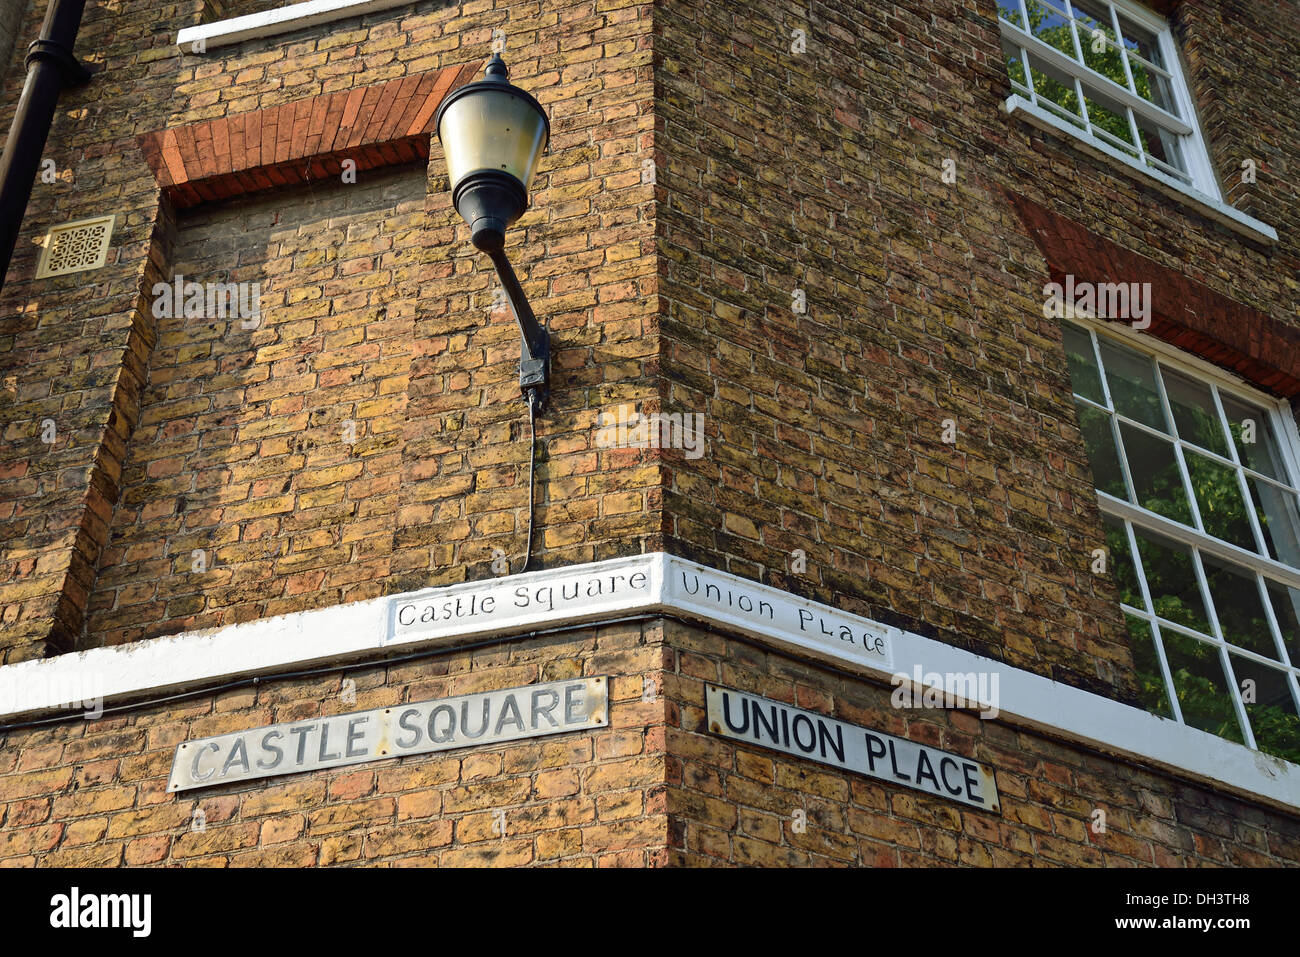 Corner of Castle Square and Union Place in Old Quarter, Wisbech, Cambridgeshire, England, United Kingdom Stock Photo